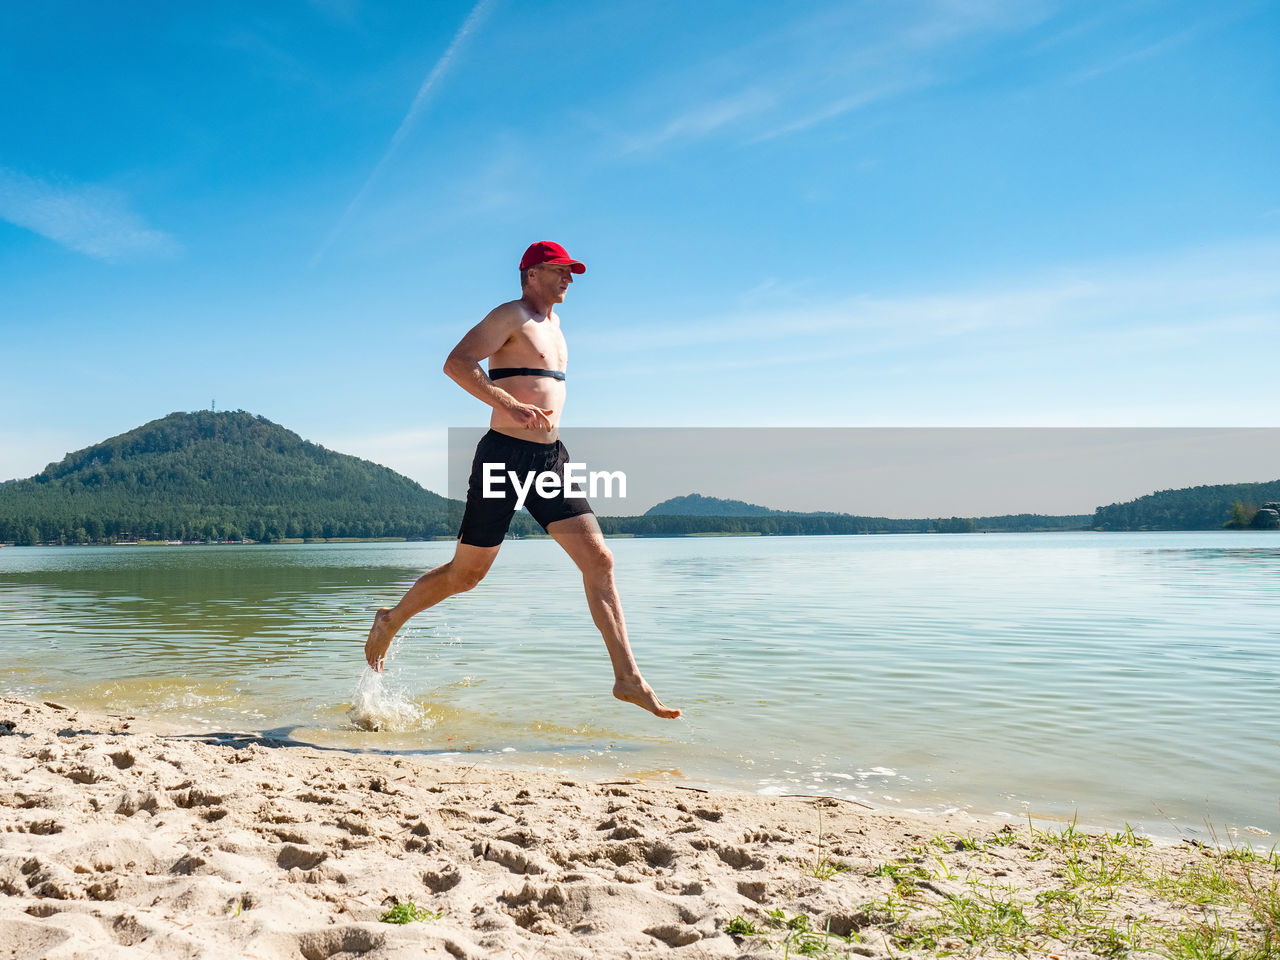 Runner run in water at beach, drops refreshing his body. runner with heart rate monitor  smart watch